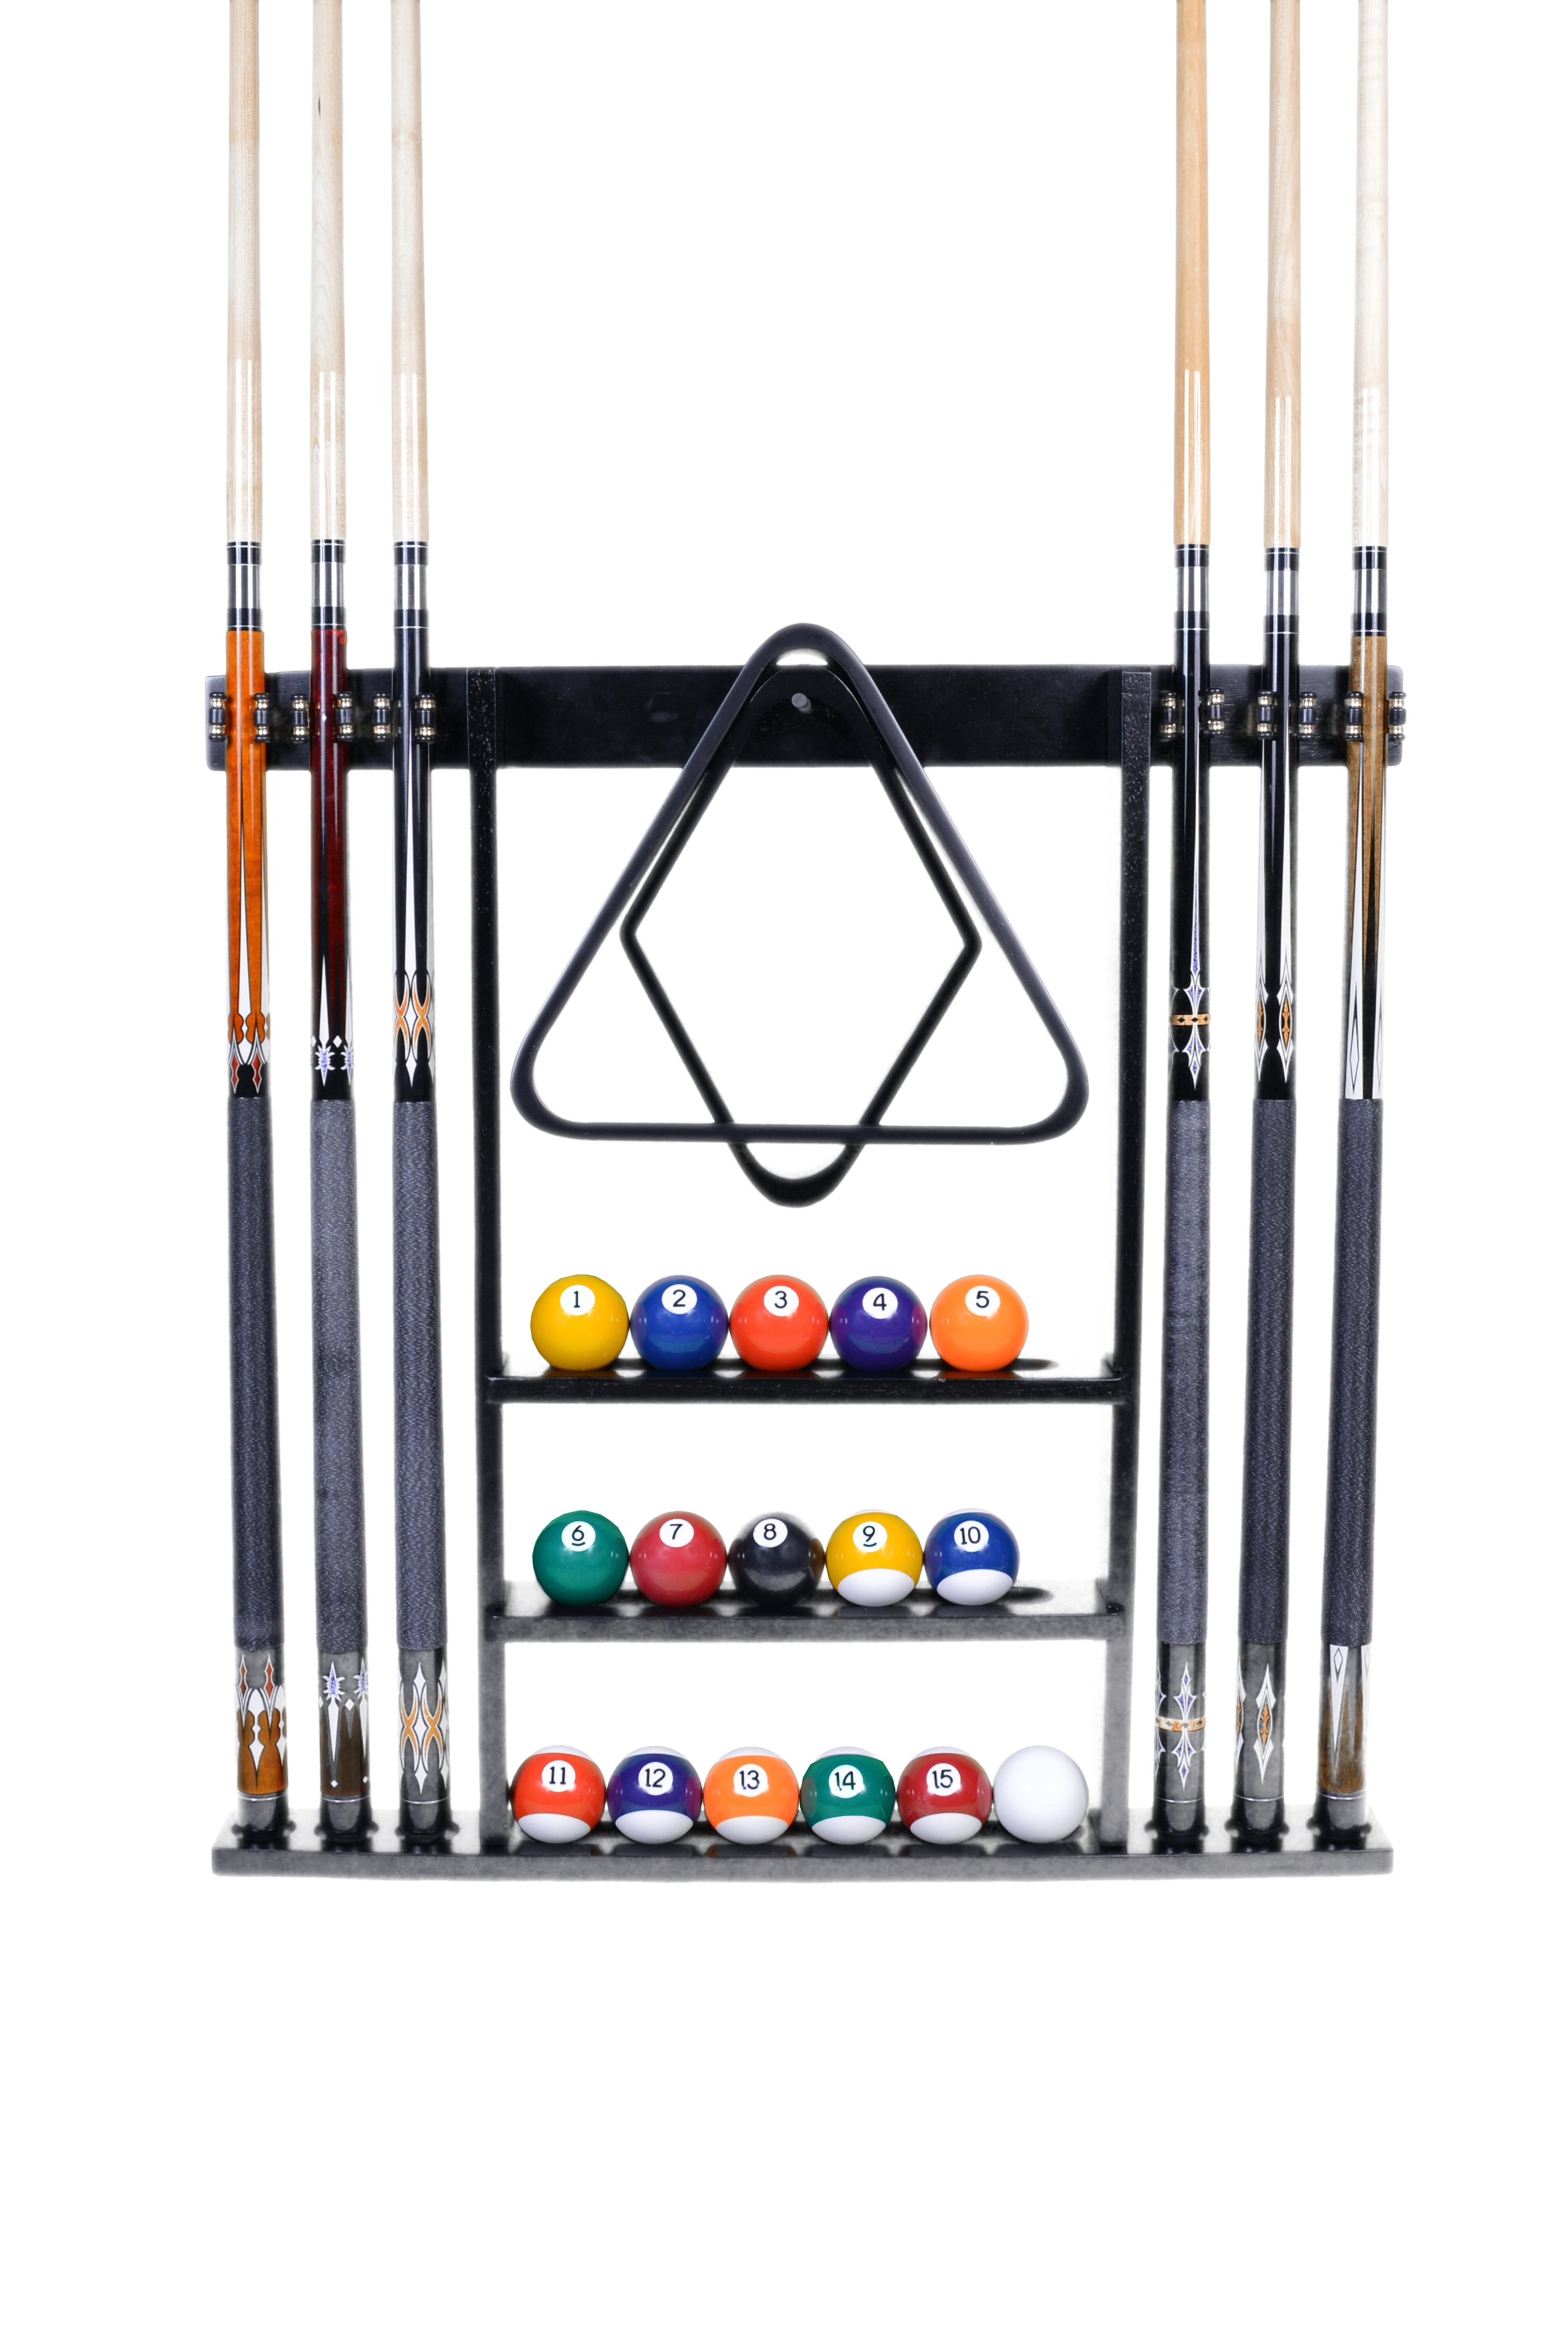 Vertical Oak Billiard Cue Rack with Billiard Trough and Item Slot for Pool Table Accessories 8-Hole Pool Cue Rack